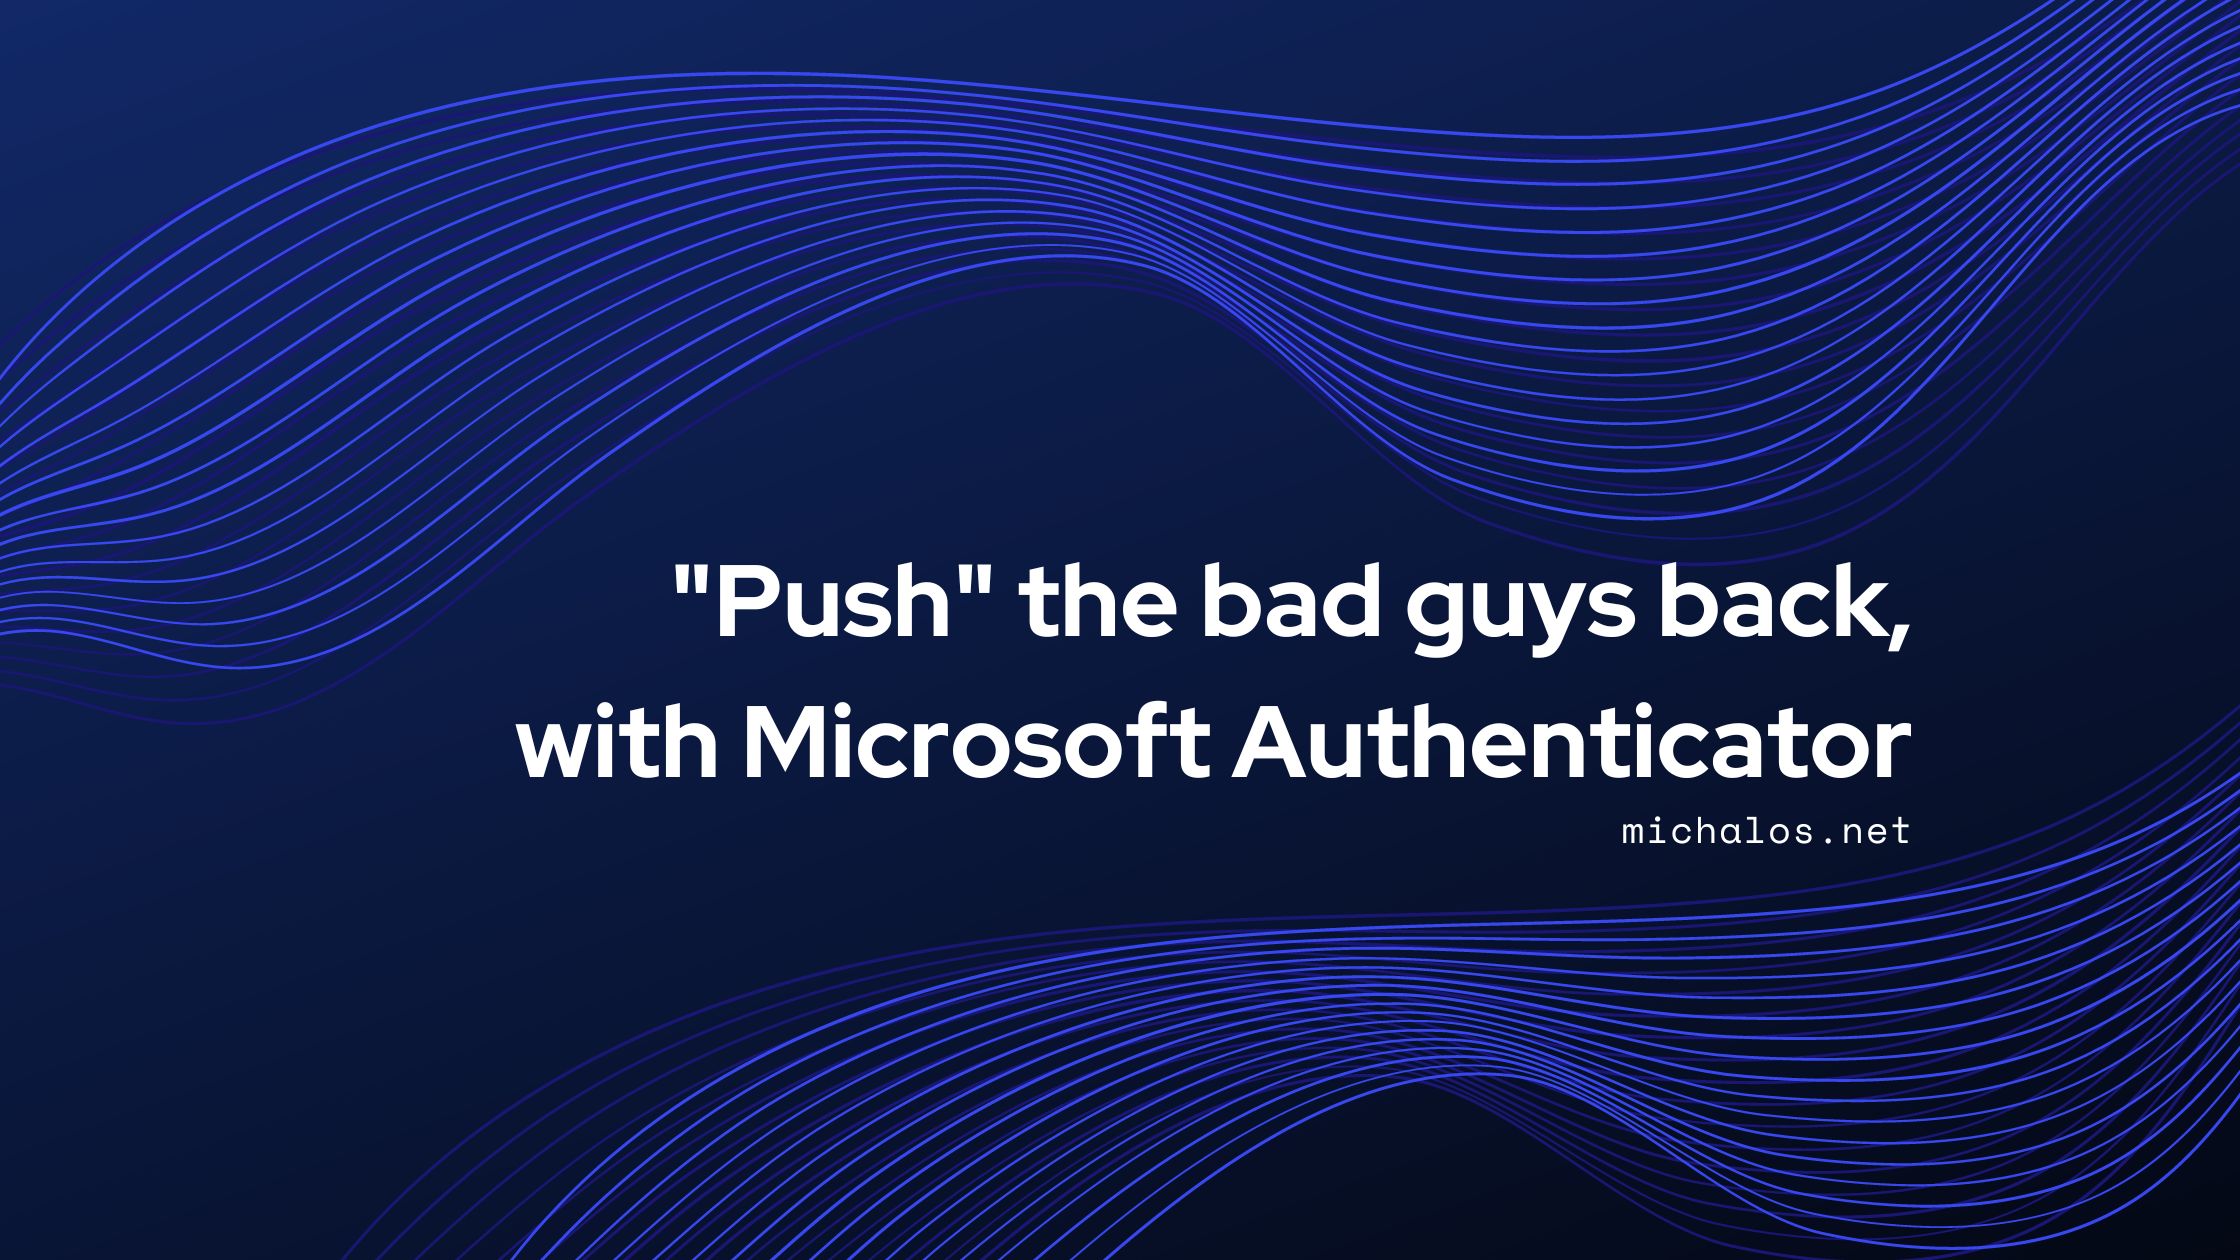 “Push” the bad guys back, with Microsoft Authenticator